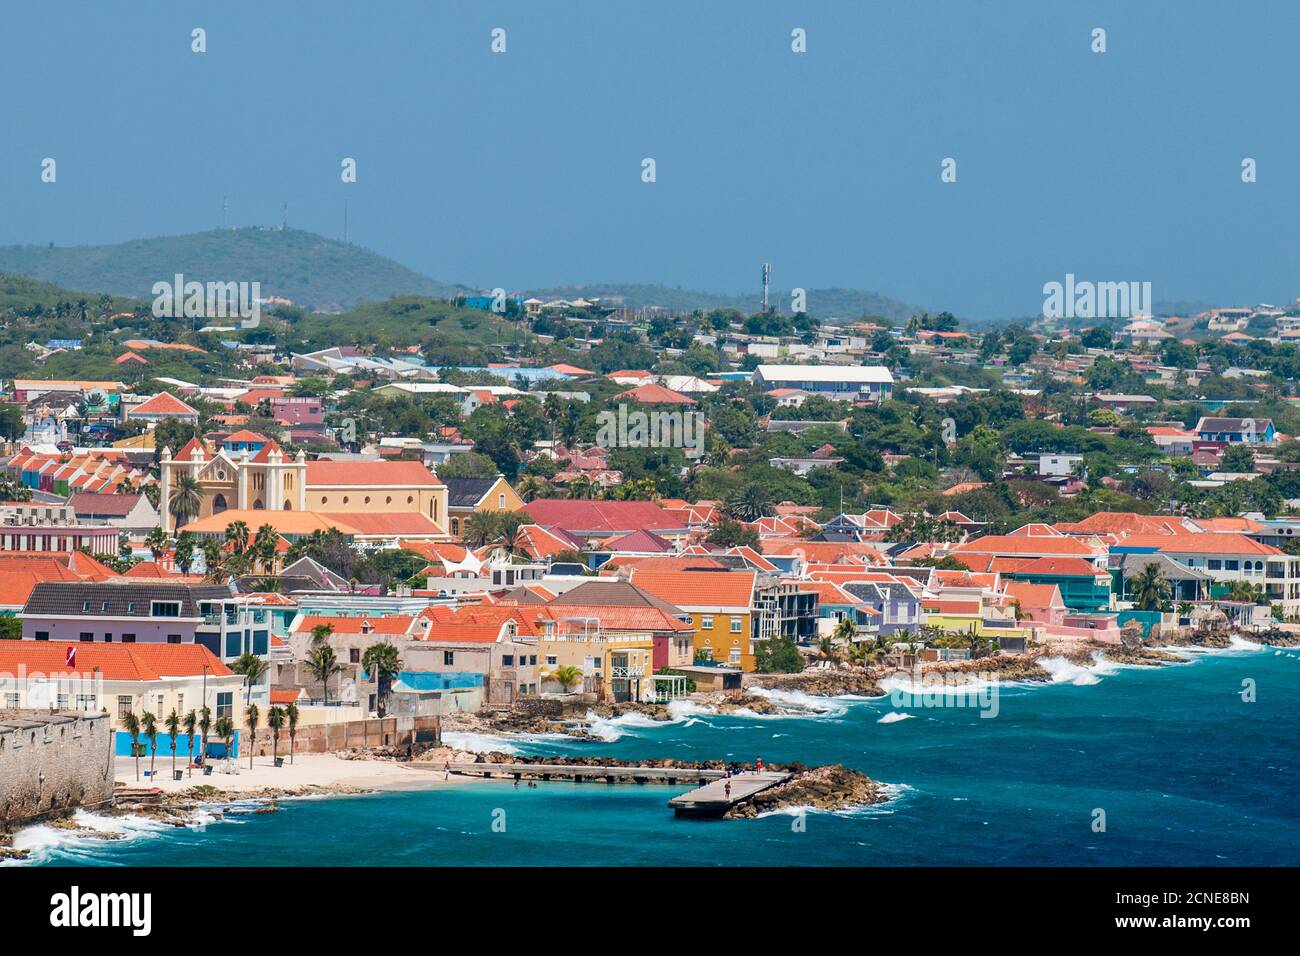 Aerial view of capital city Willemstad, Curacao, ABC Islands, Dutch Antilles, Caribbean, Central America Stock Photo